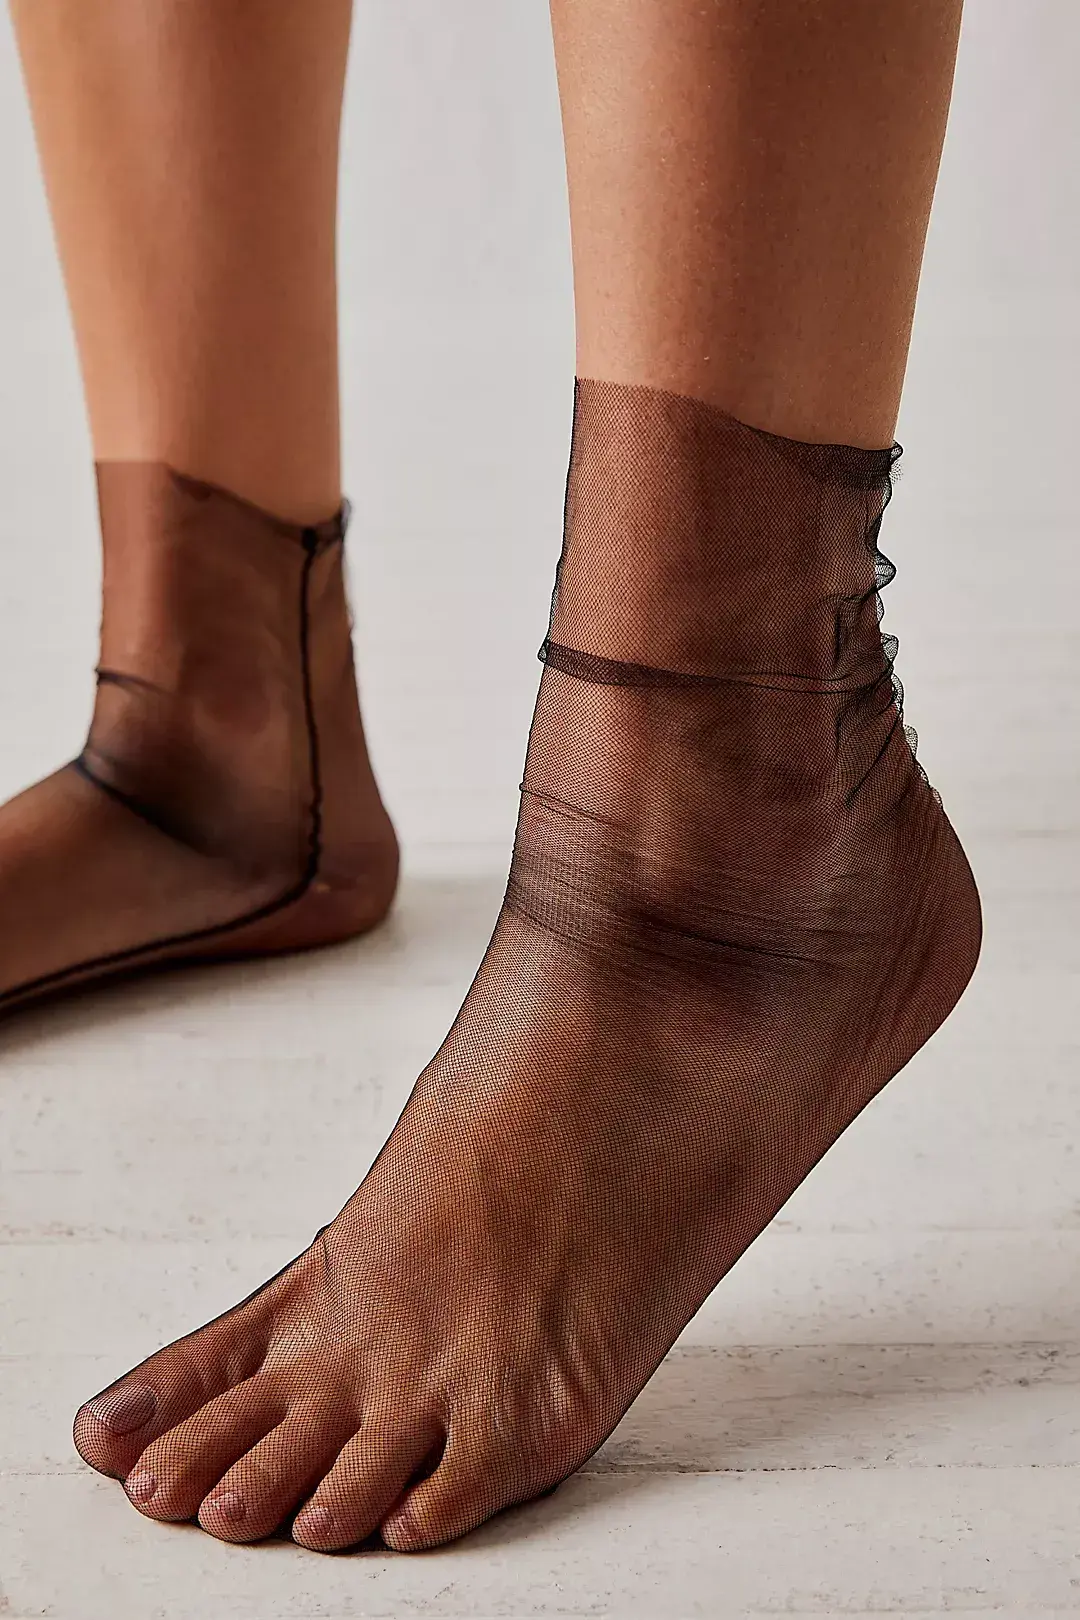 Free People The Moment Sheer Socks - Squash Blossom Boutique